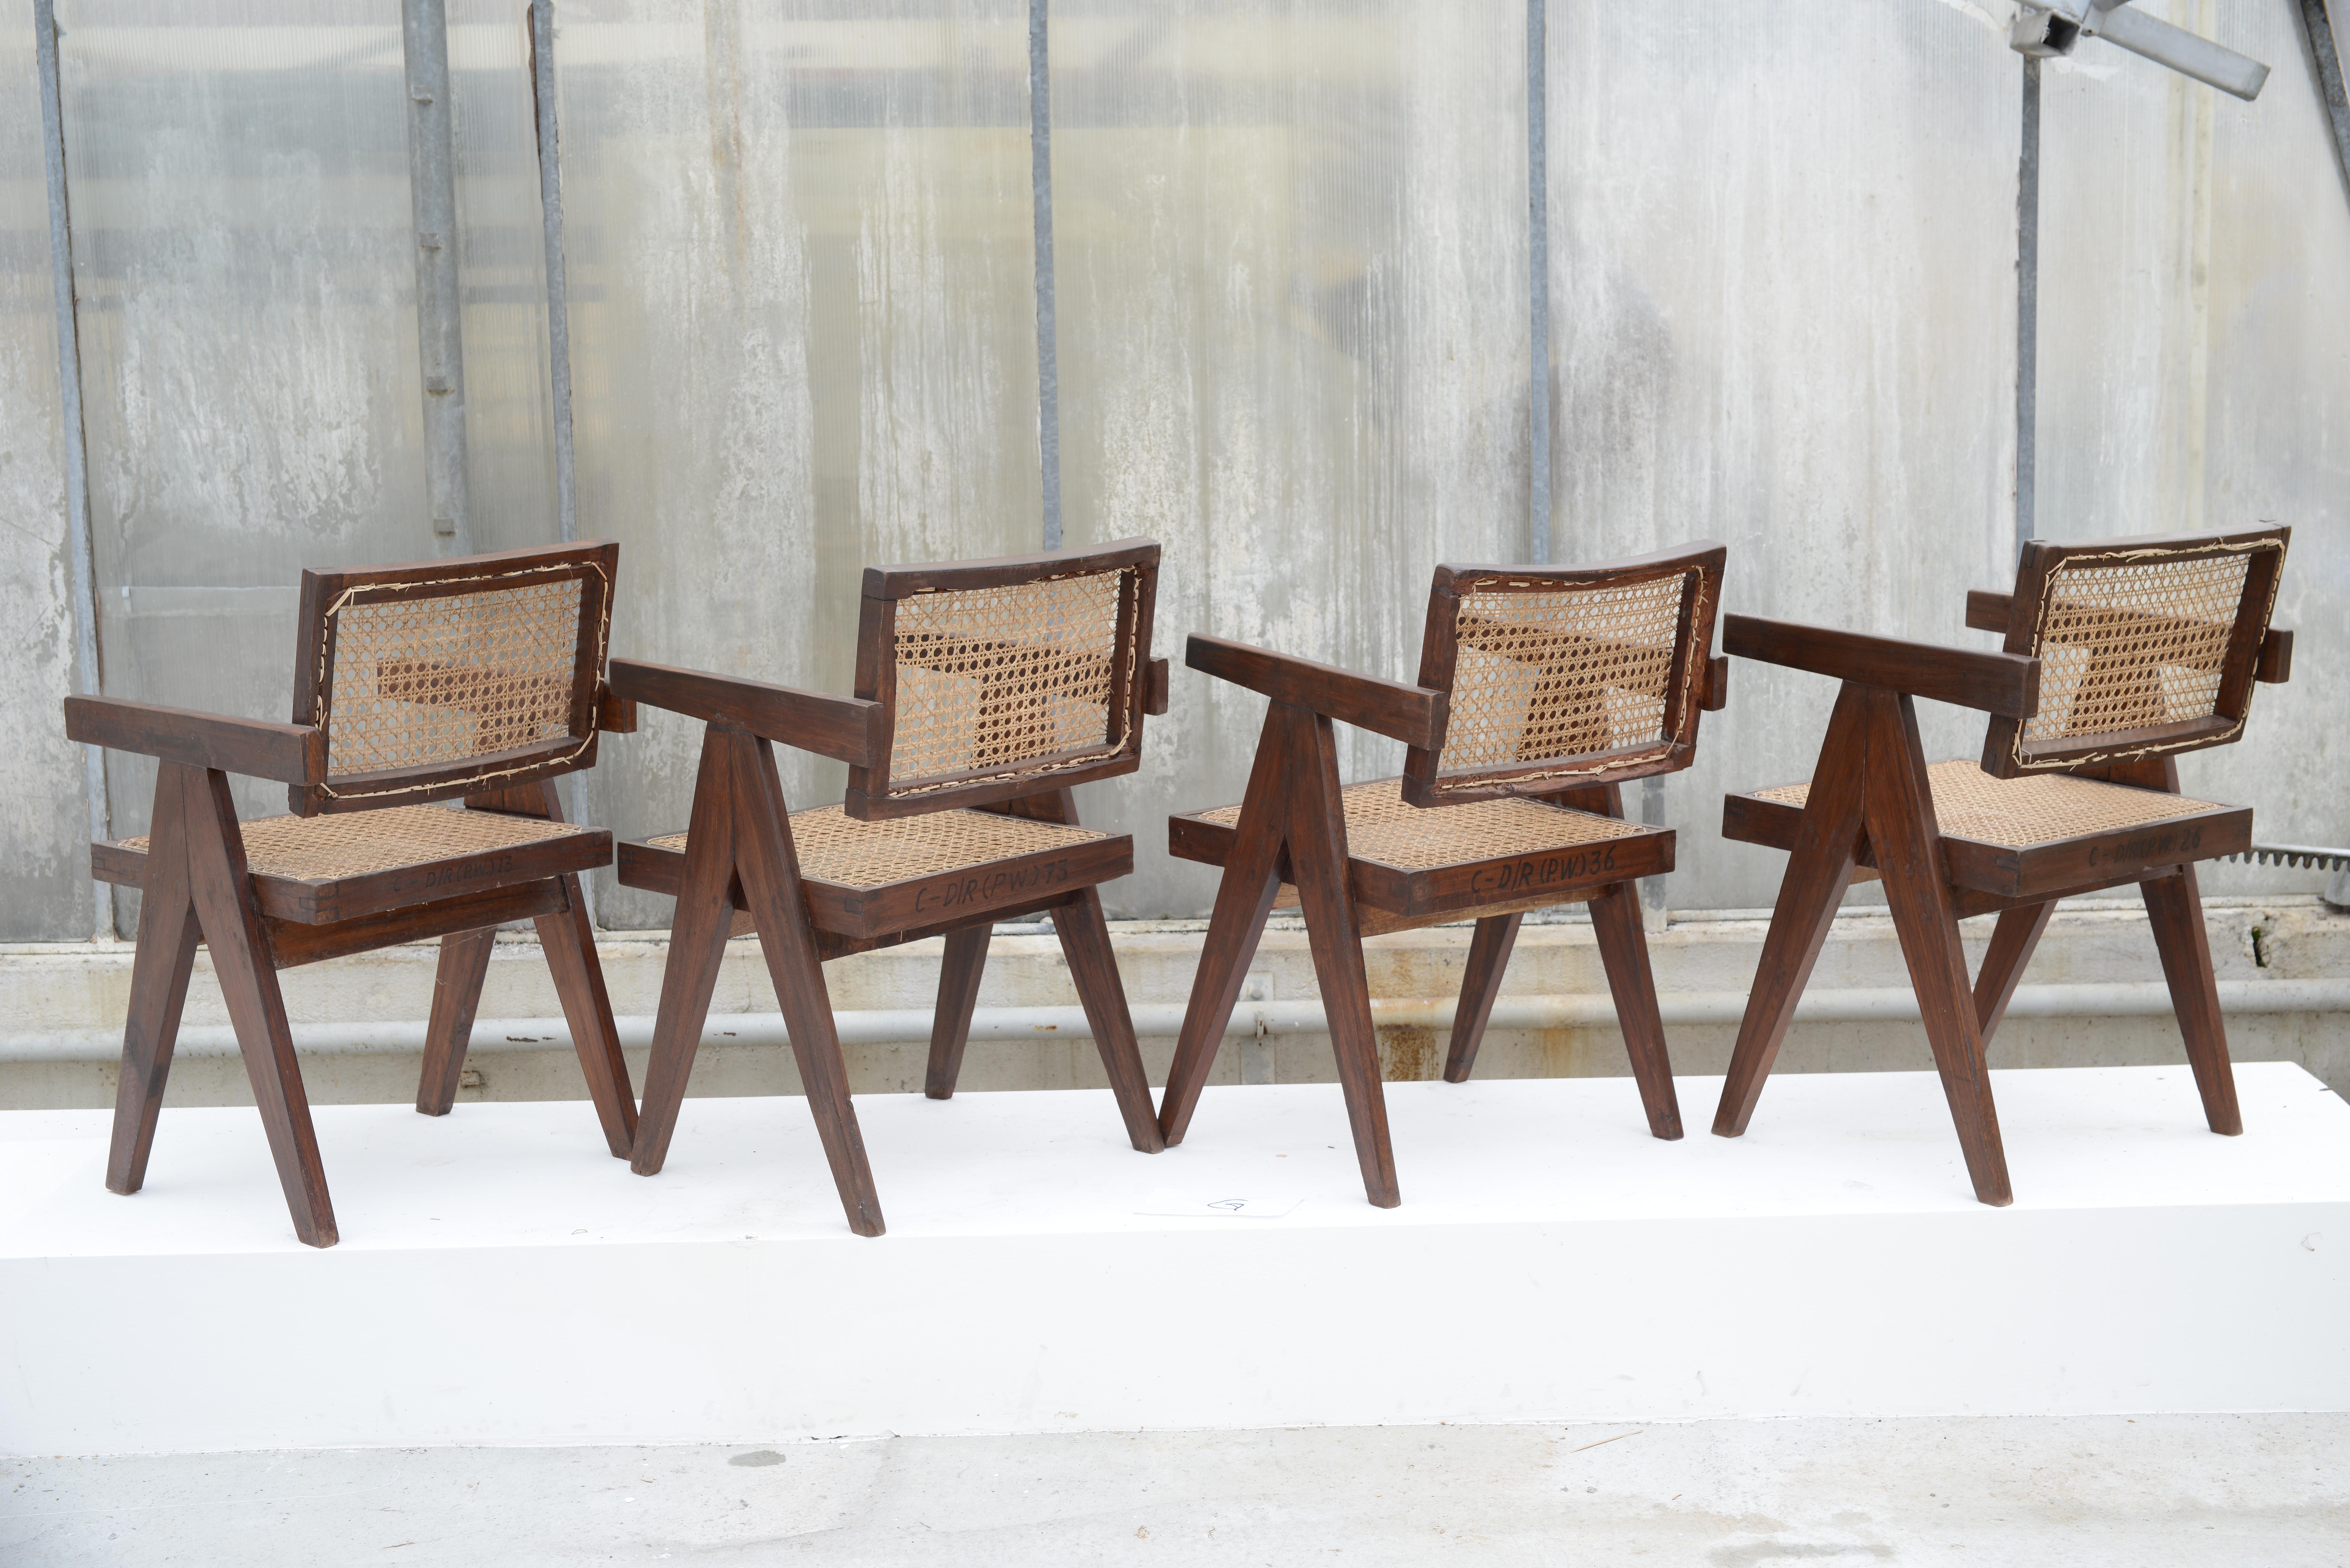 Pierre Jeanneret Set of 4 Chairs / Authentic Mid-Century Modern PJ-SI-28-A 1